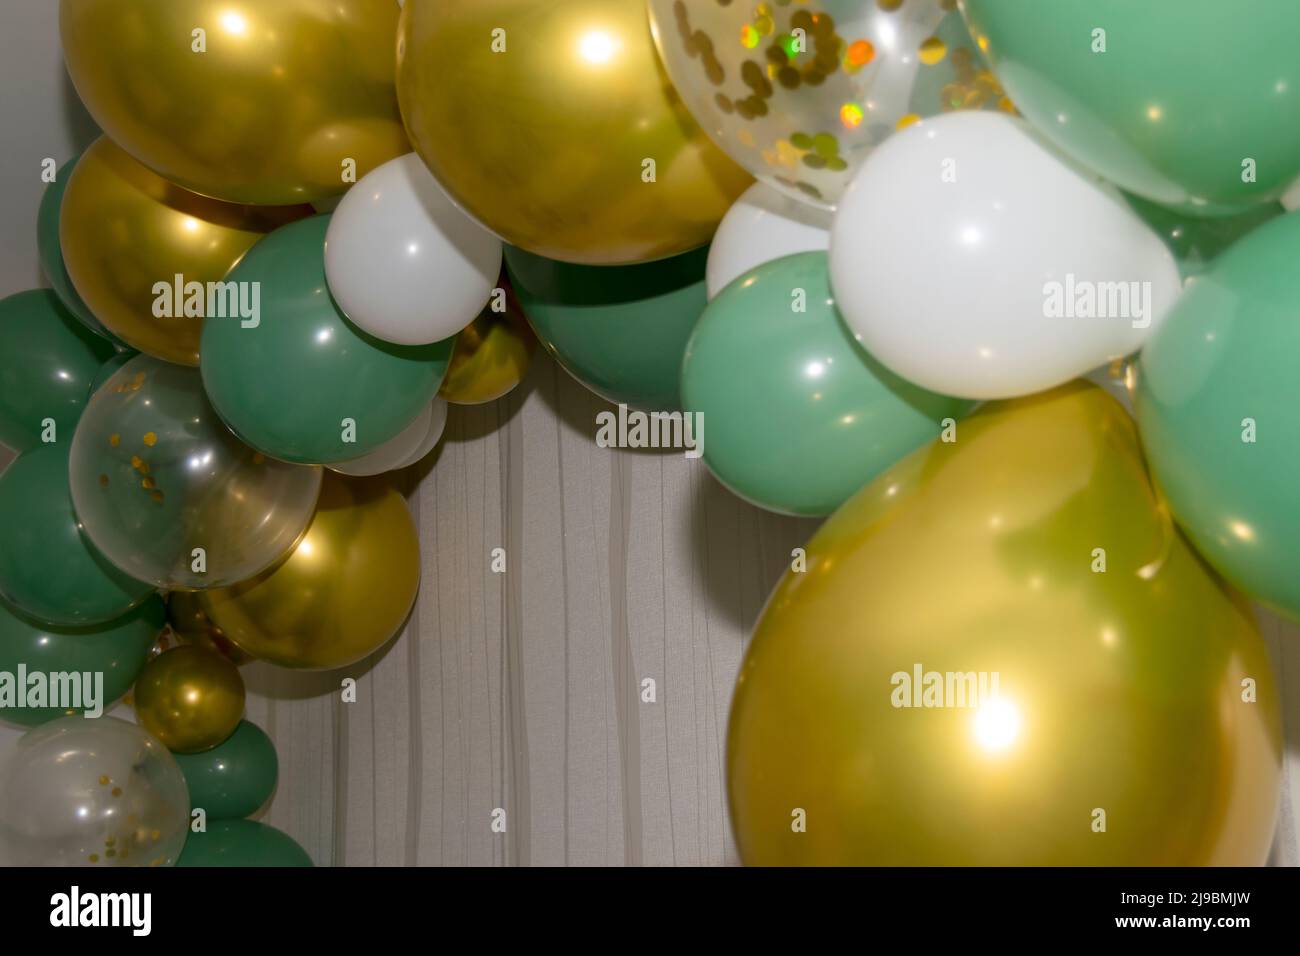 Golden Green and white balloons hanging on a wall, party or events decorations. Birthday partying. Stock Photo